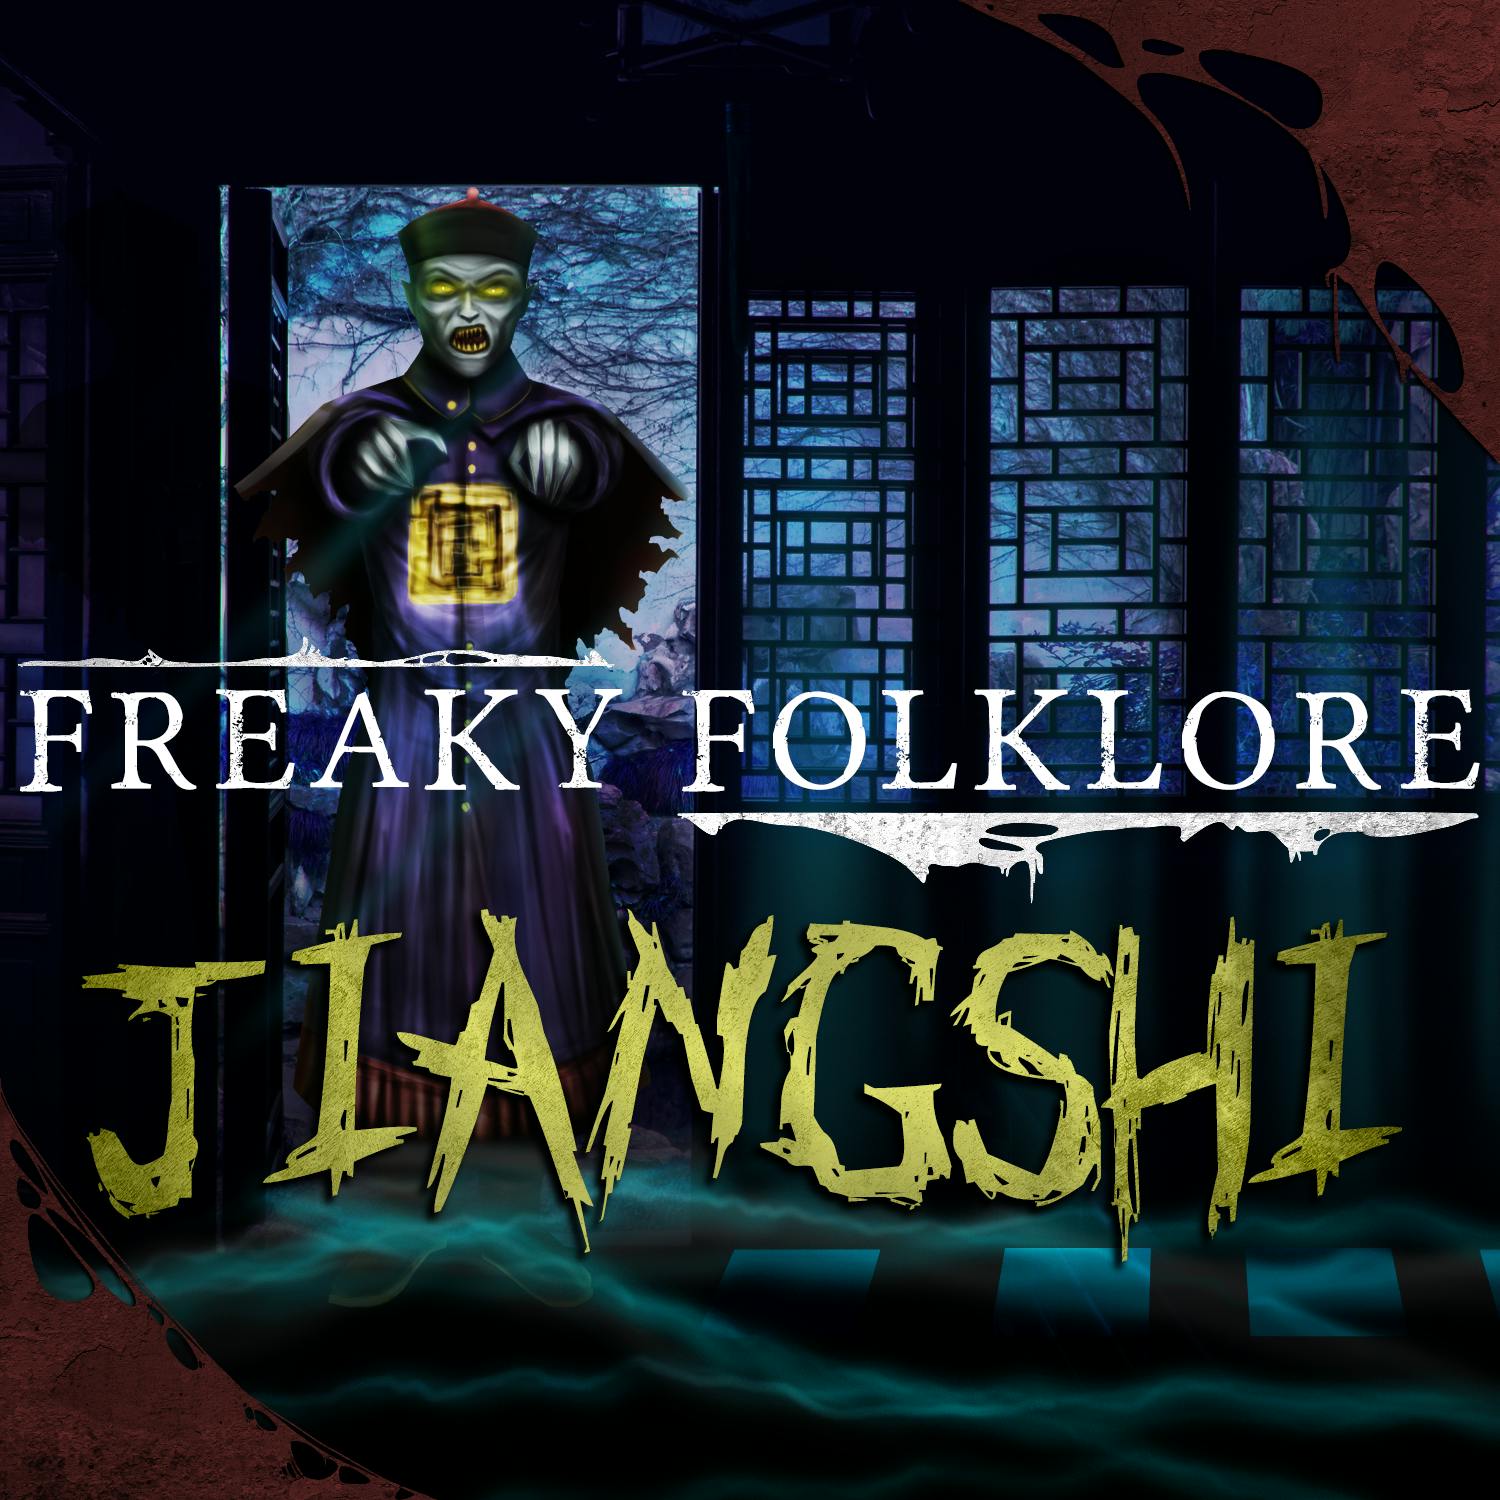 Jiangshi - The Chinese Vampire that will Leap Out at You